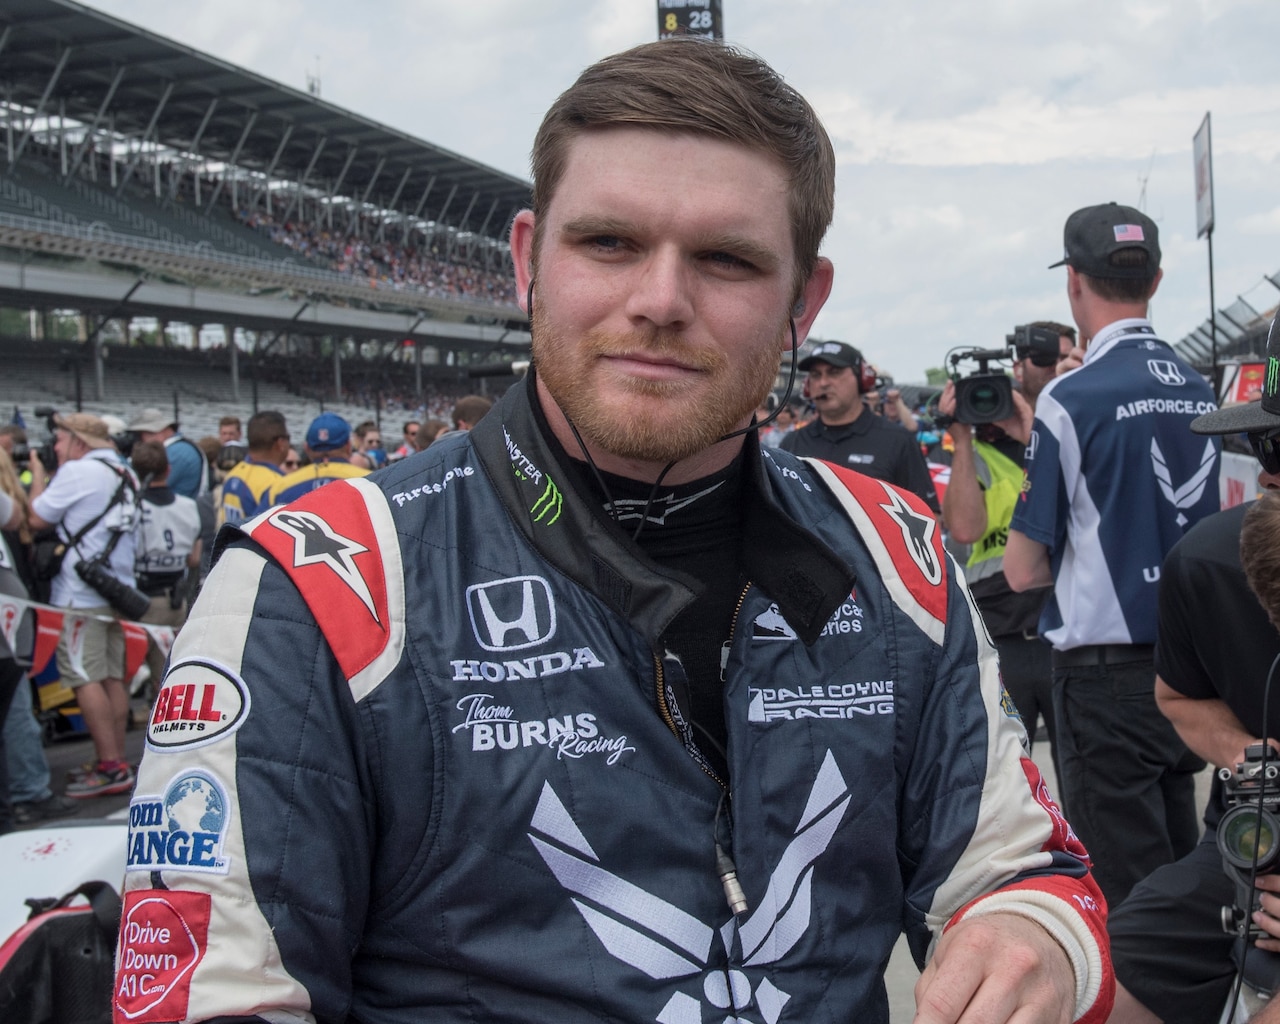 Conor Daly, driver of the No. 17 U.S. Air Force Recruiting Service Thom Burns Racing Honda, prepares to put on his helmet on pit road during "bump day" at Indianapolis Motor Speedway.